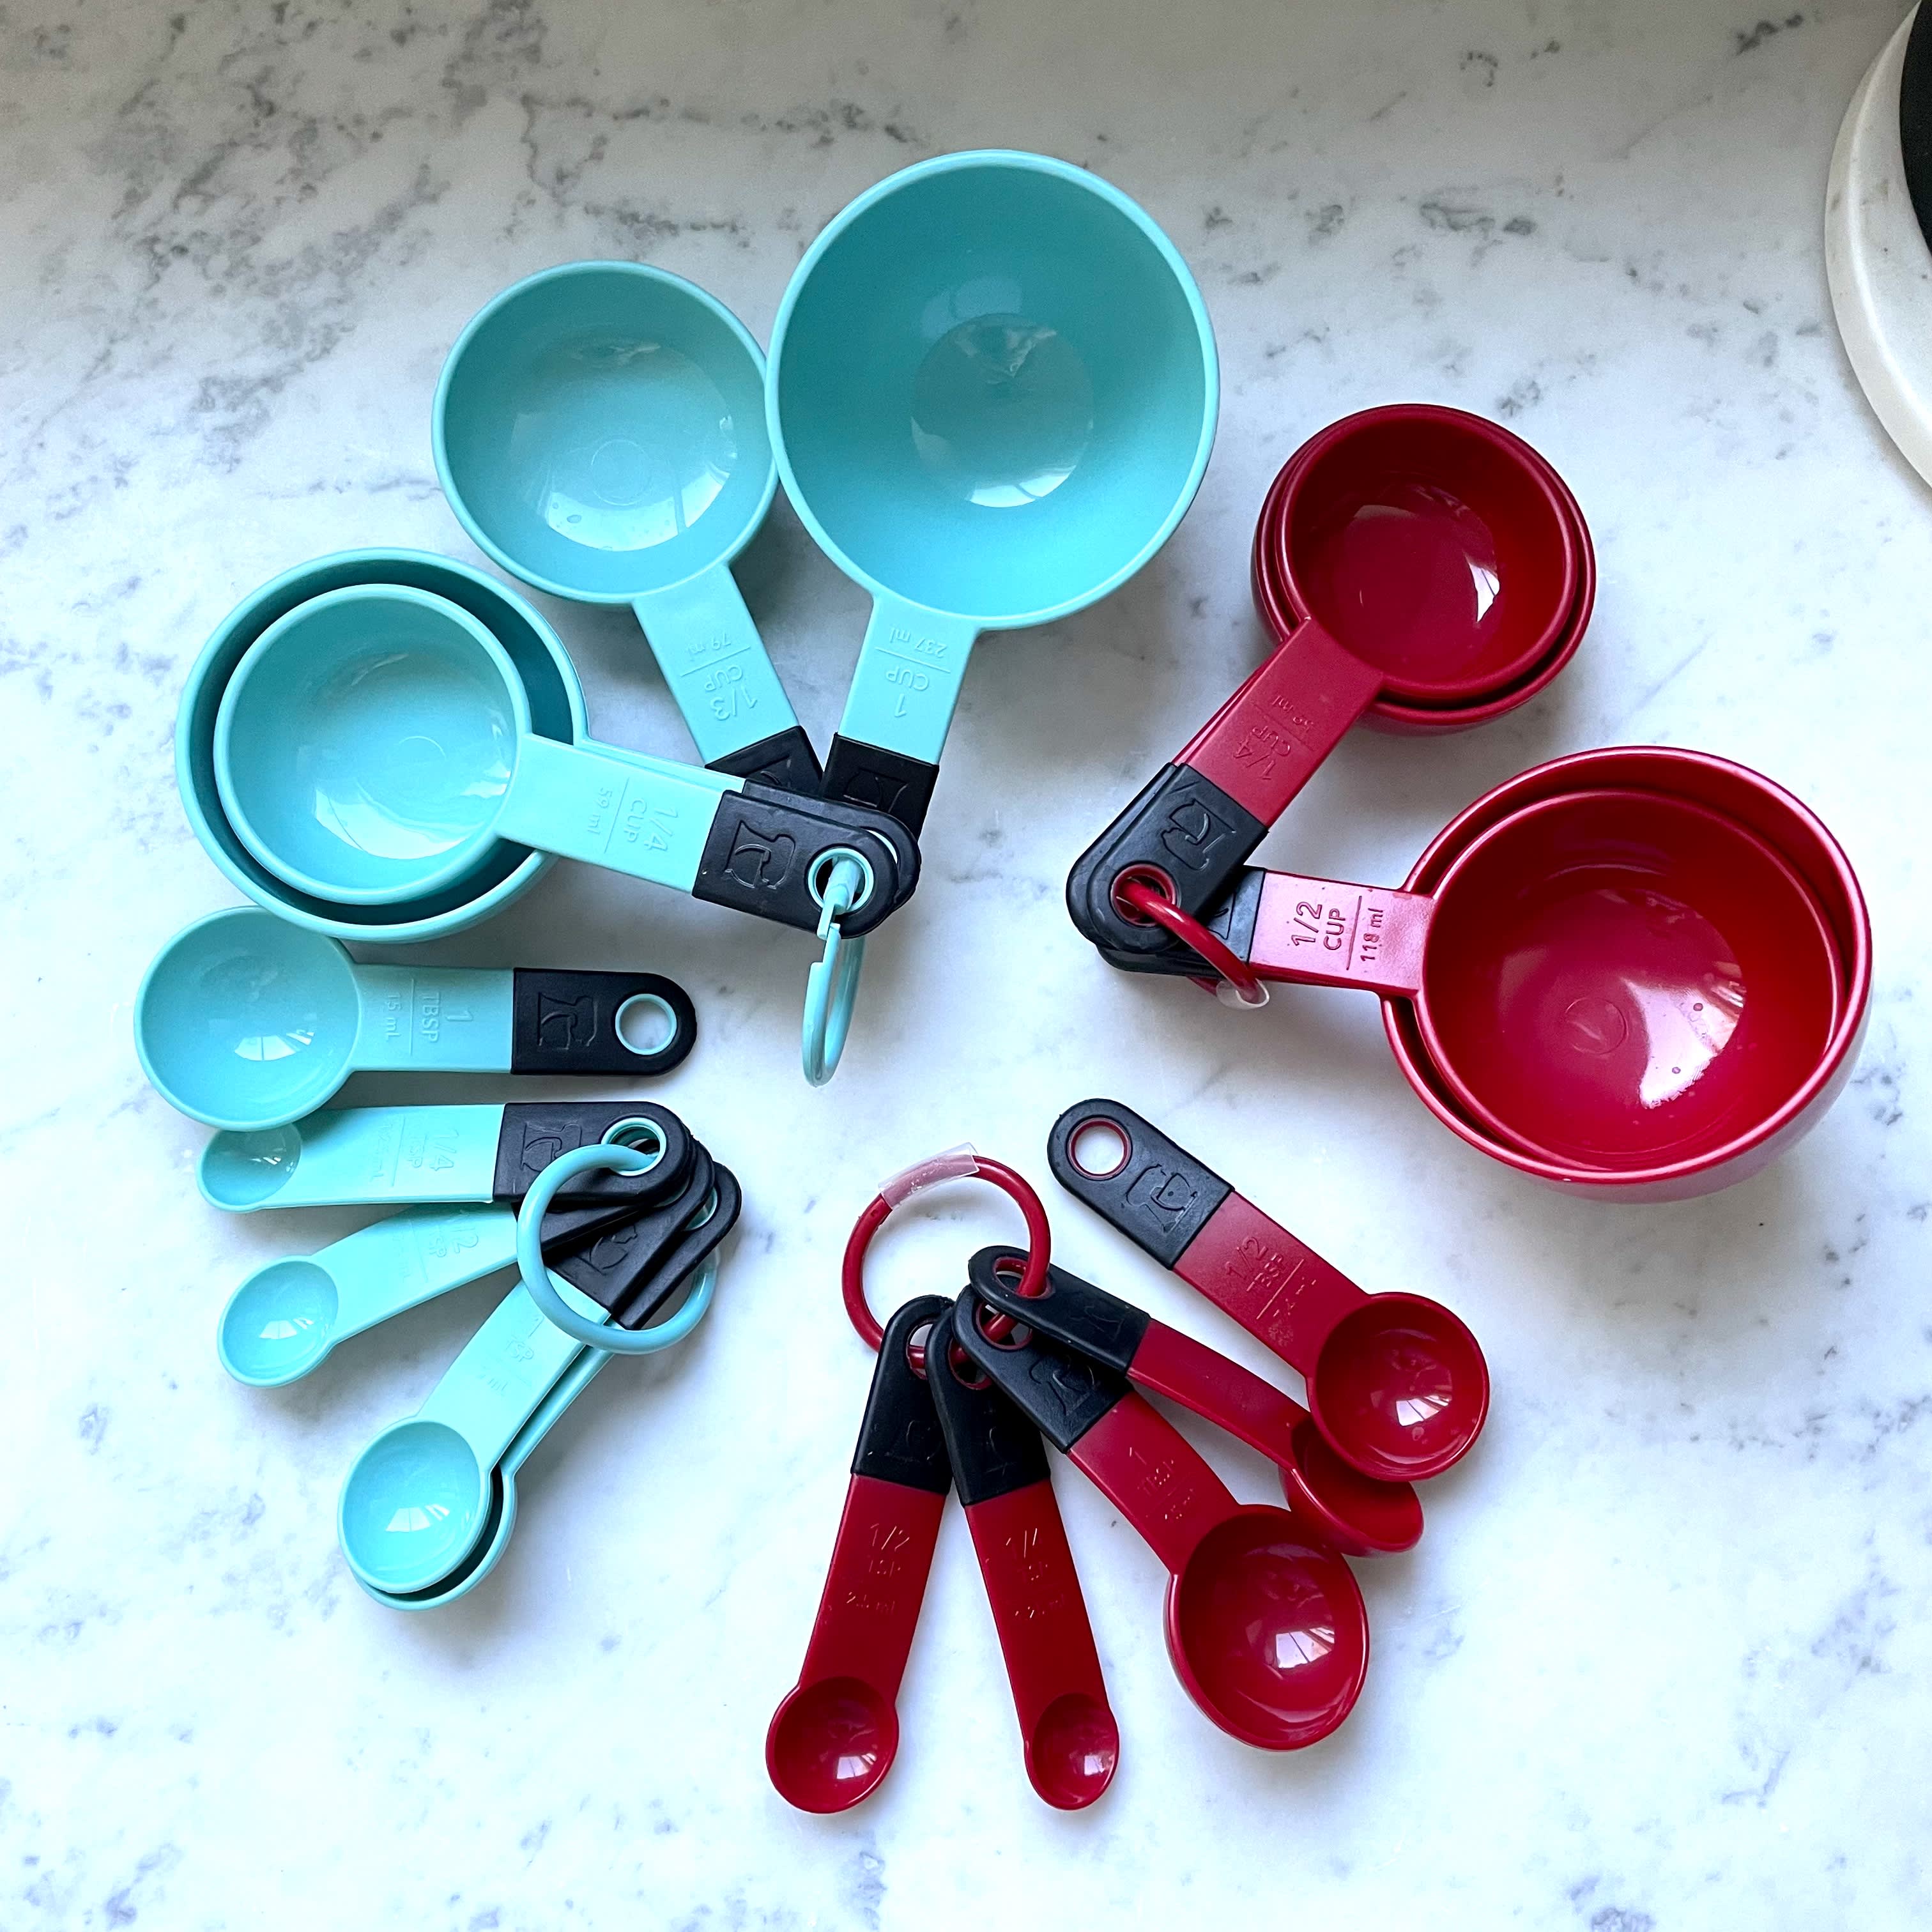 KitchenAid Measuring Cups & Spoons, Red